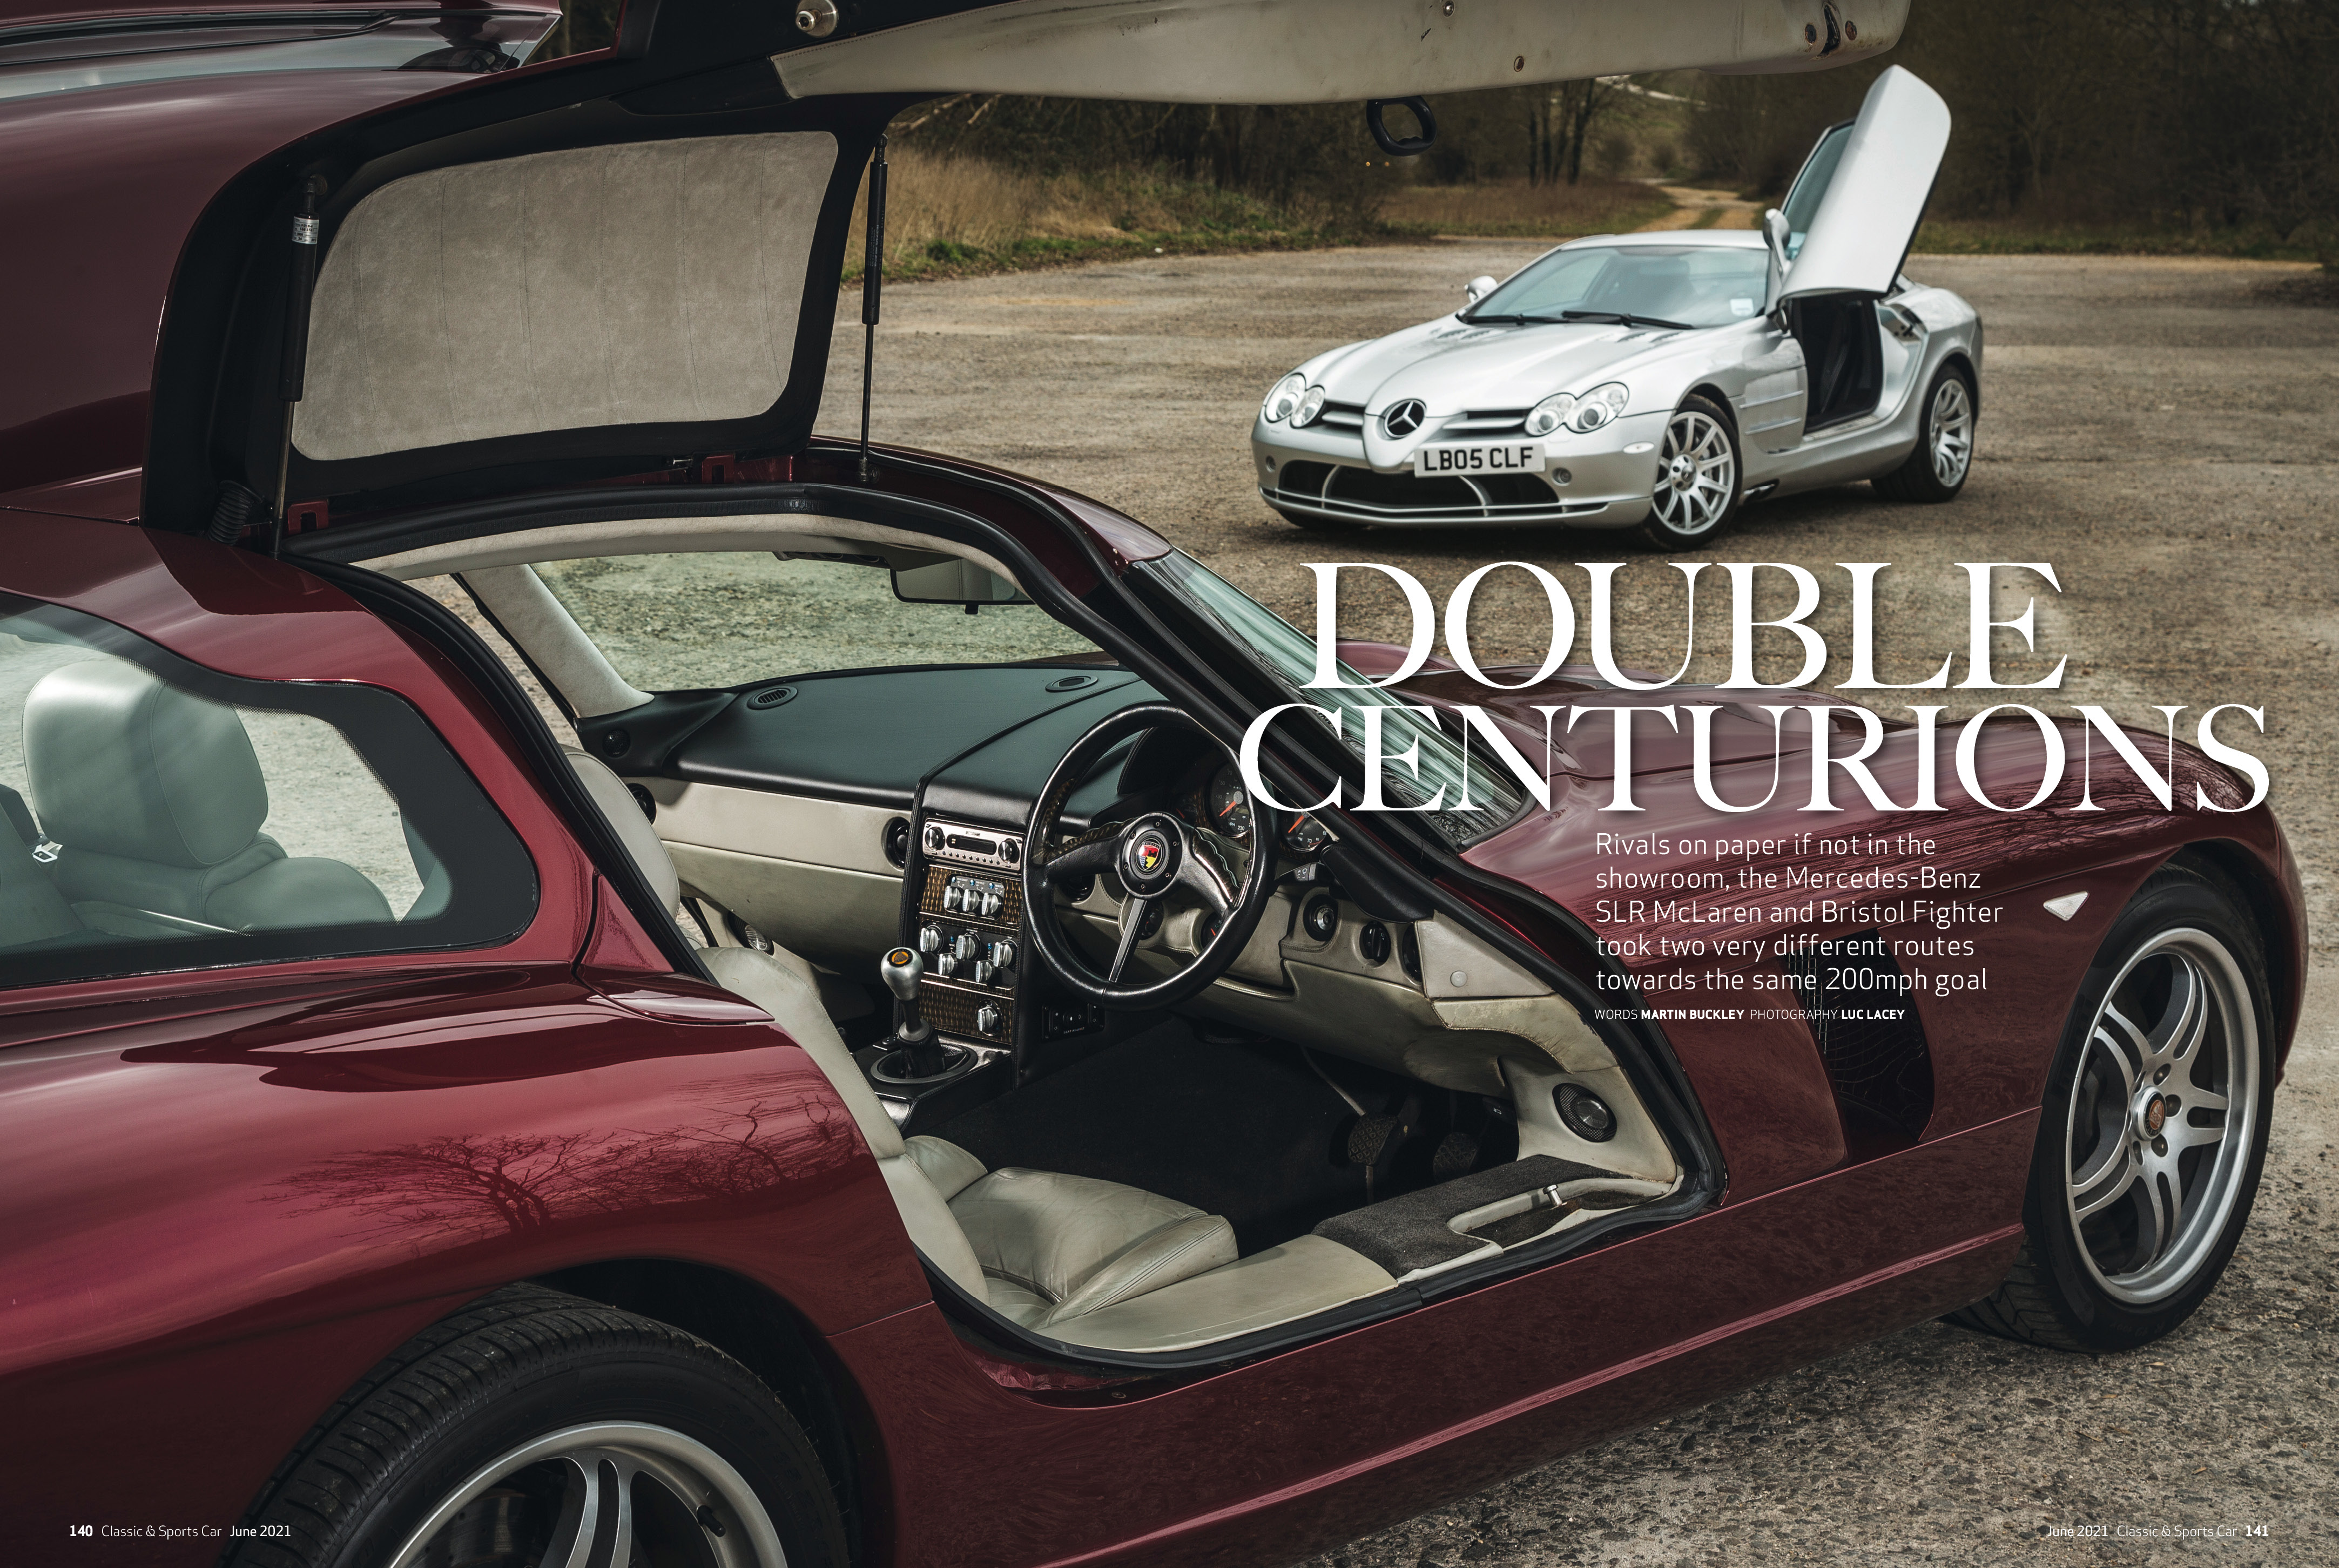 Classic & Sports Car – Muscle car special: inside the June 2021 issue of C&SC